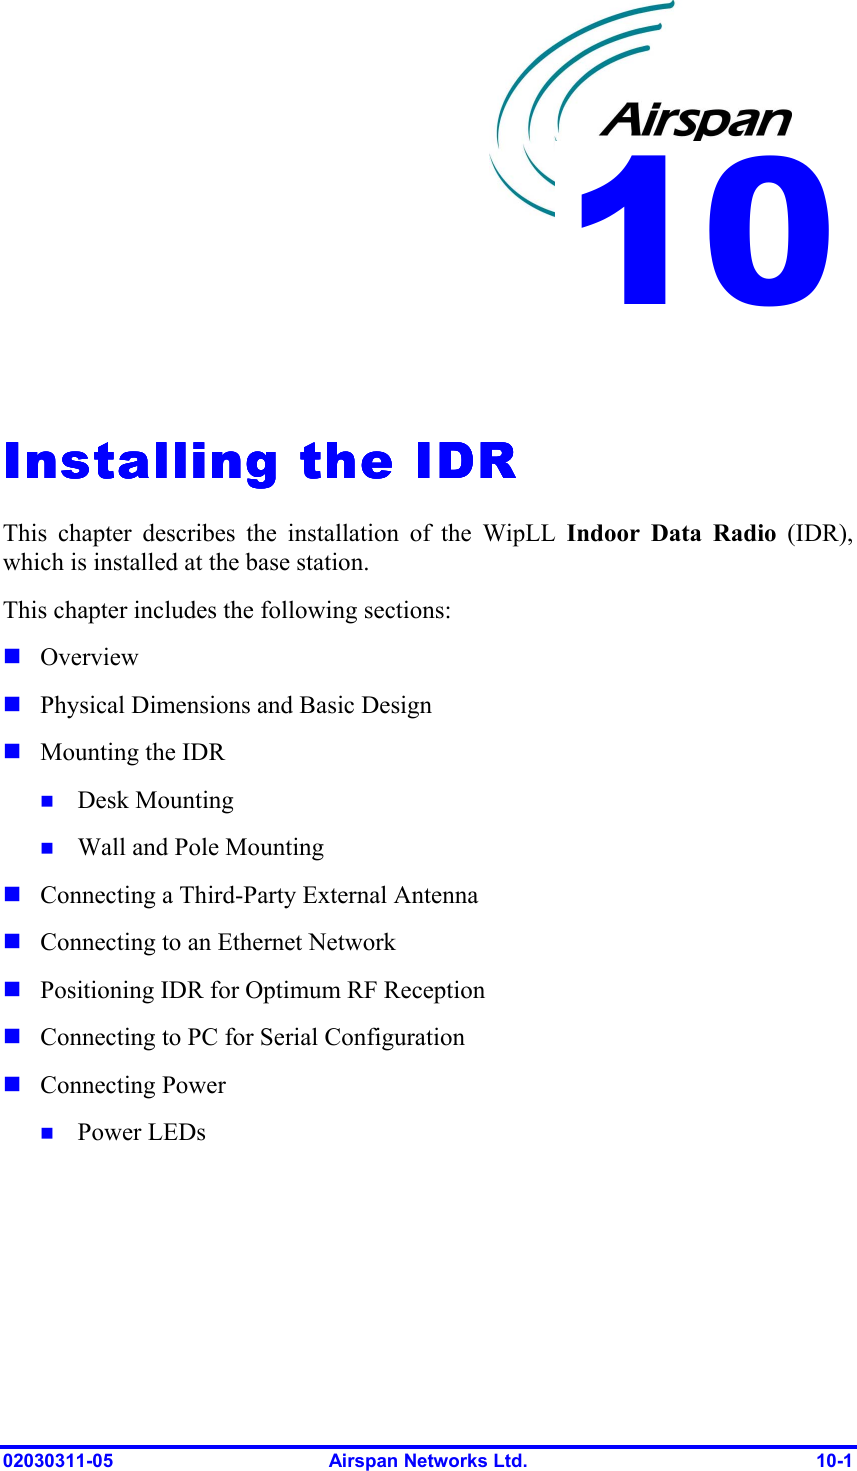  02030311-05  Airspan Networks Ltd.  10-1   Installing the IDRInstalling the IDRInstalling the IDRInstalling the IDR    This chapter describes the installation of the WipLL Indoor Data Radio (IDR), which is installed at the base station. This chapter includes the following sections: ! Overview ! Physical Dimensions and Basic Design ! Mounting the IDR  !  Desk Mounting !  Wall and Pole Mounting   ! Connecting a Third-Party External Antenna ! Connecting to an Ethernet Network ! Positioning IDR for Optimum RF Reception  ! Connecting to PC for Serial Configuration ! Connecting Power !  Power LEDs 10